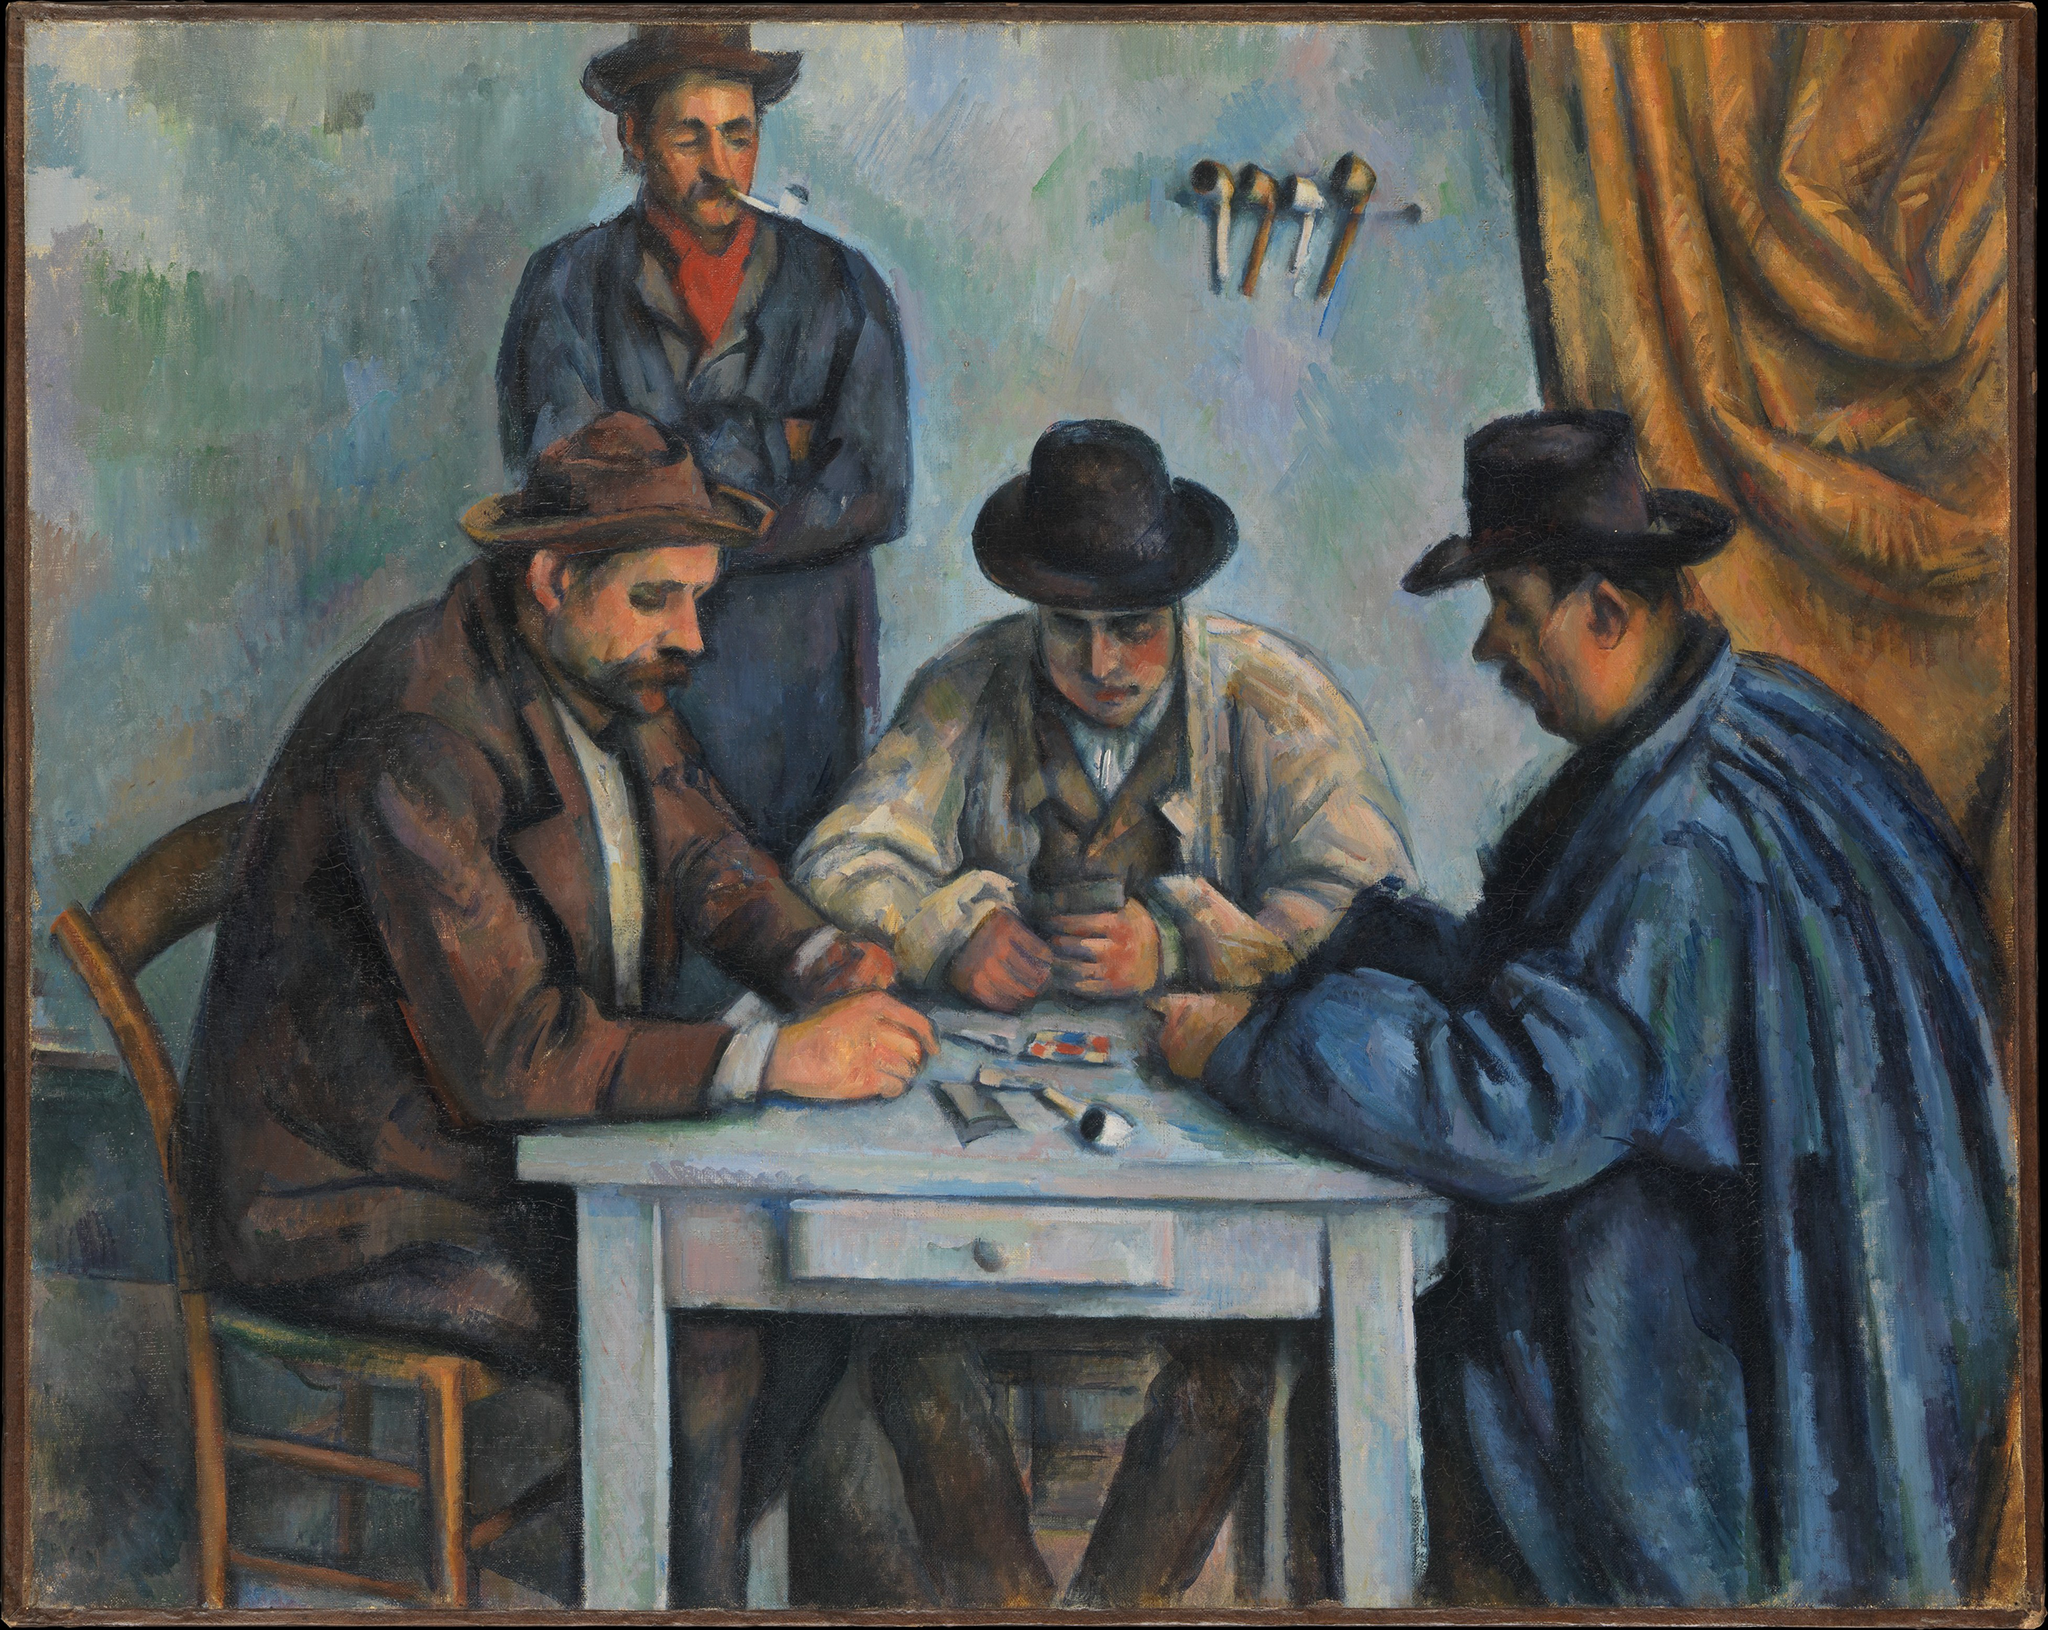 A painting depicting three men sitting down at a small white table playing a game of cards. The men wear brown, white, and blue coats along with brown and black brimmed hats. They focus on the cards in their hand and on the table. In the background, there is a man against the light blue and green wall smoking a pipe. To his right is a stand holding four other pipes and a large golden cloth hanging.